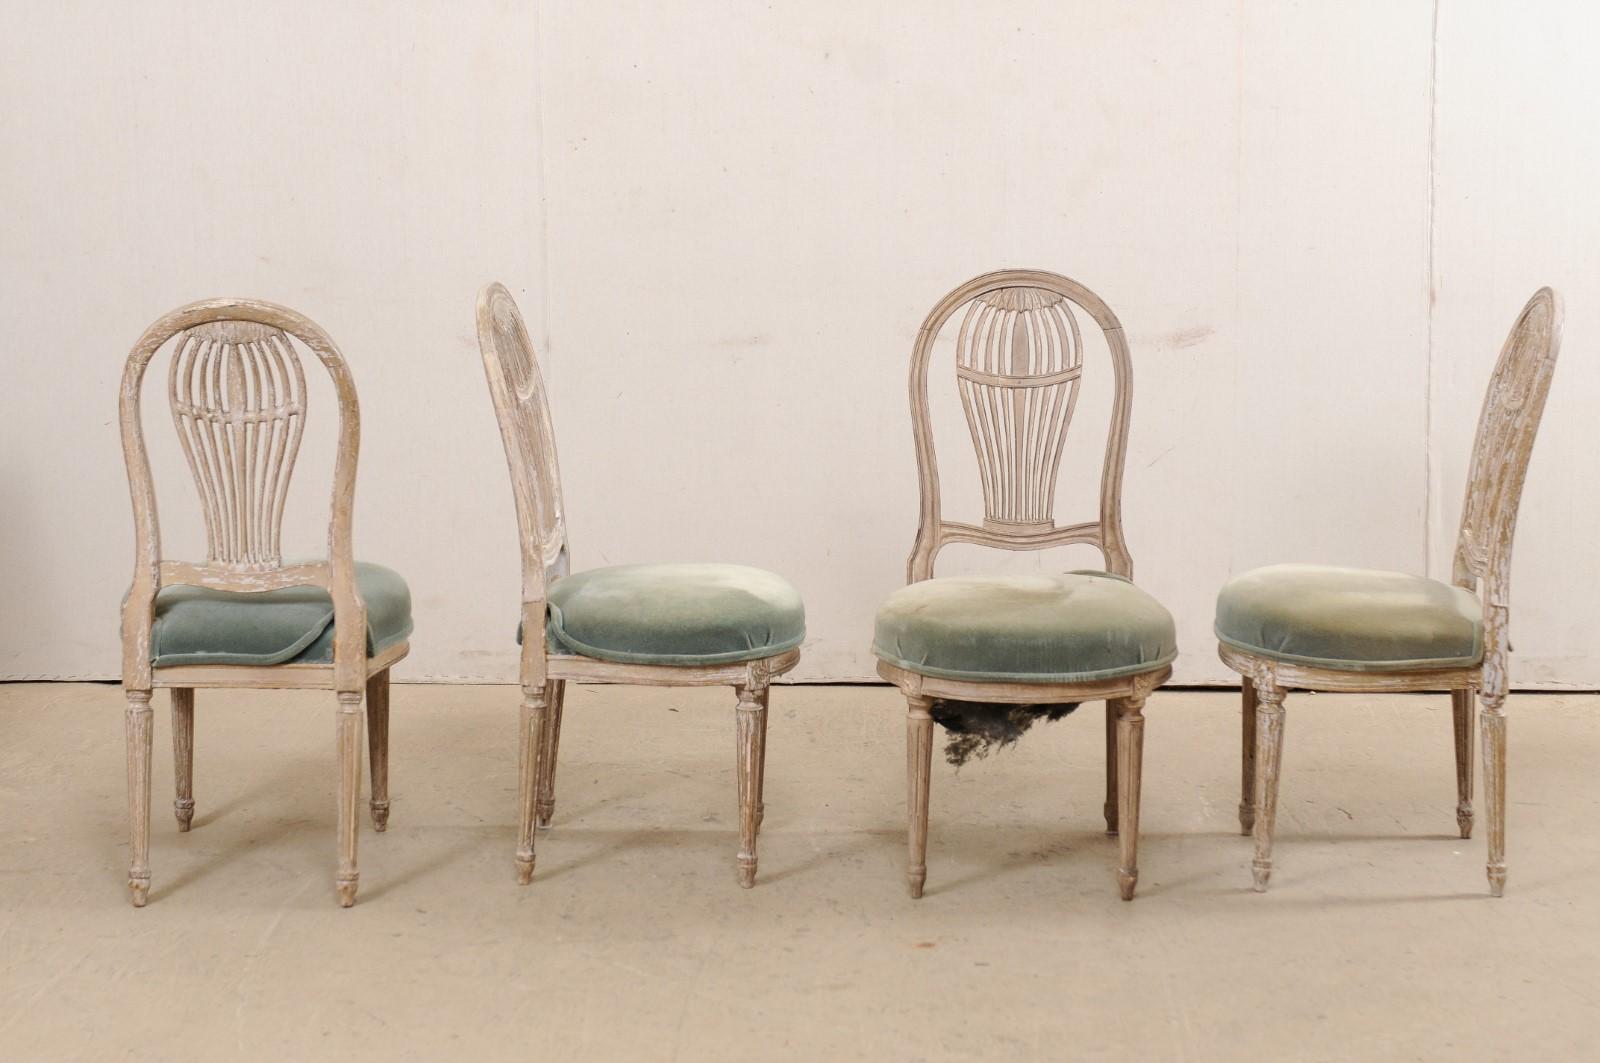 A French set of four carved-wood Jansen-style side chairs, with upholstered seats, from the mid 20th century. This set of vintage chairs from France each feature beautiful pierce-carved balloon backs, reminiscent of 18th century hot air balloons,